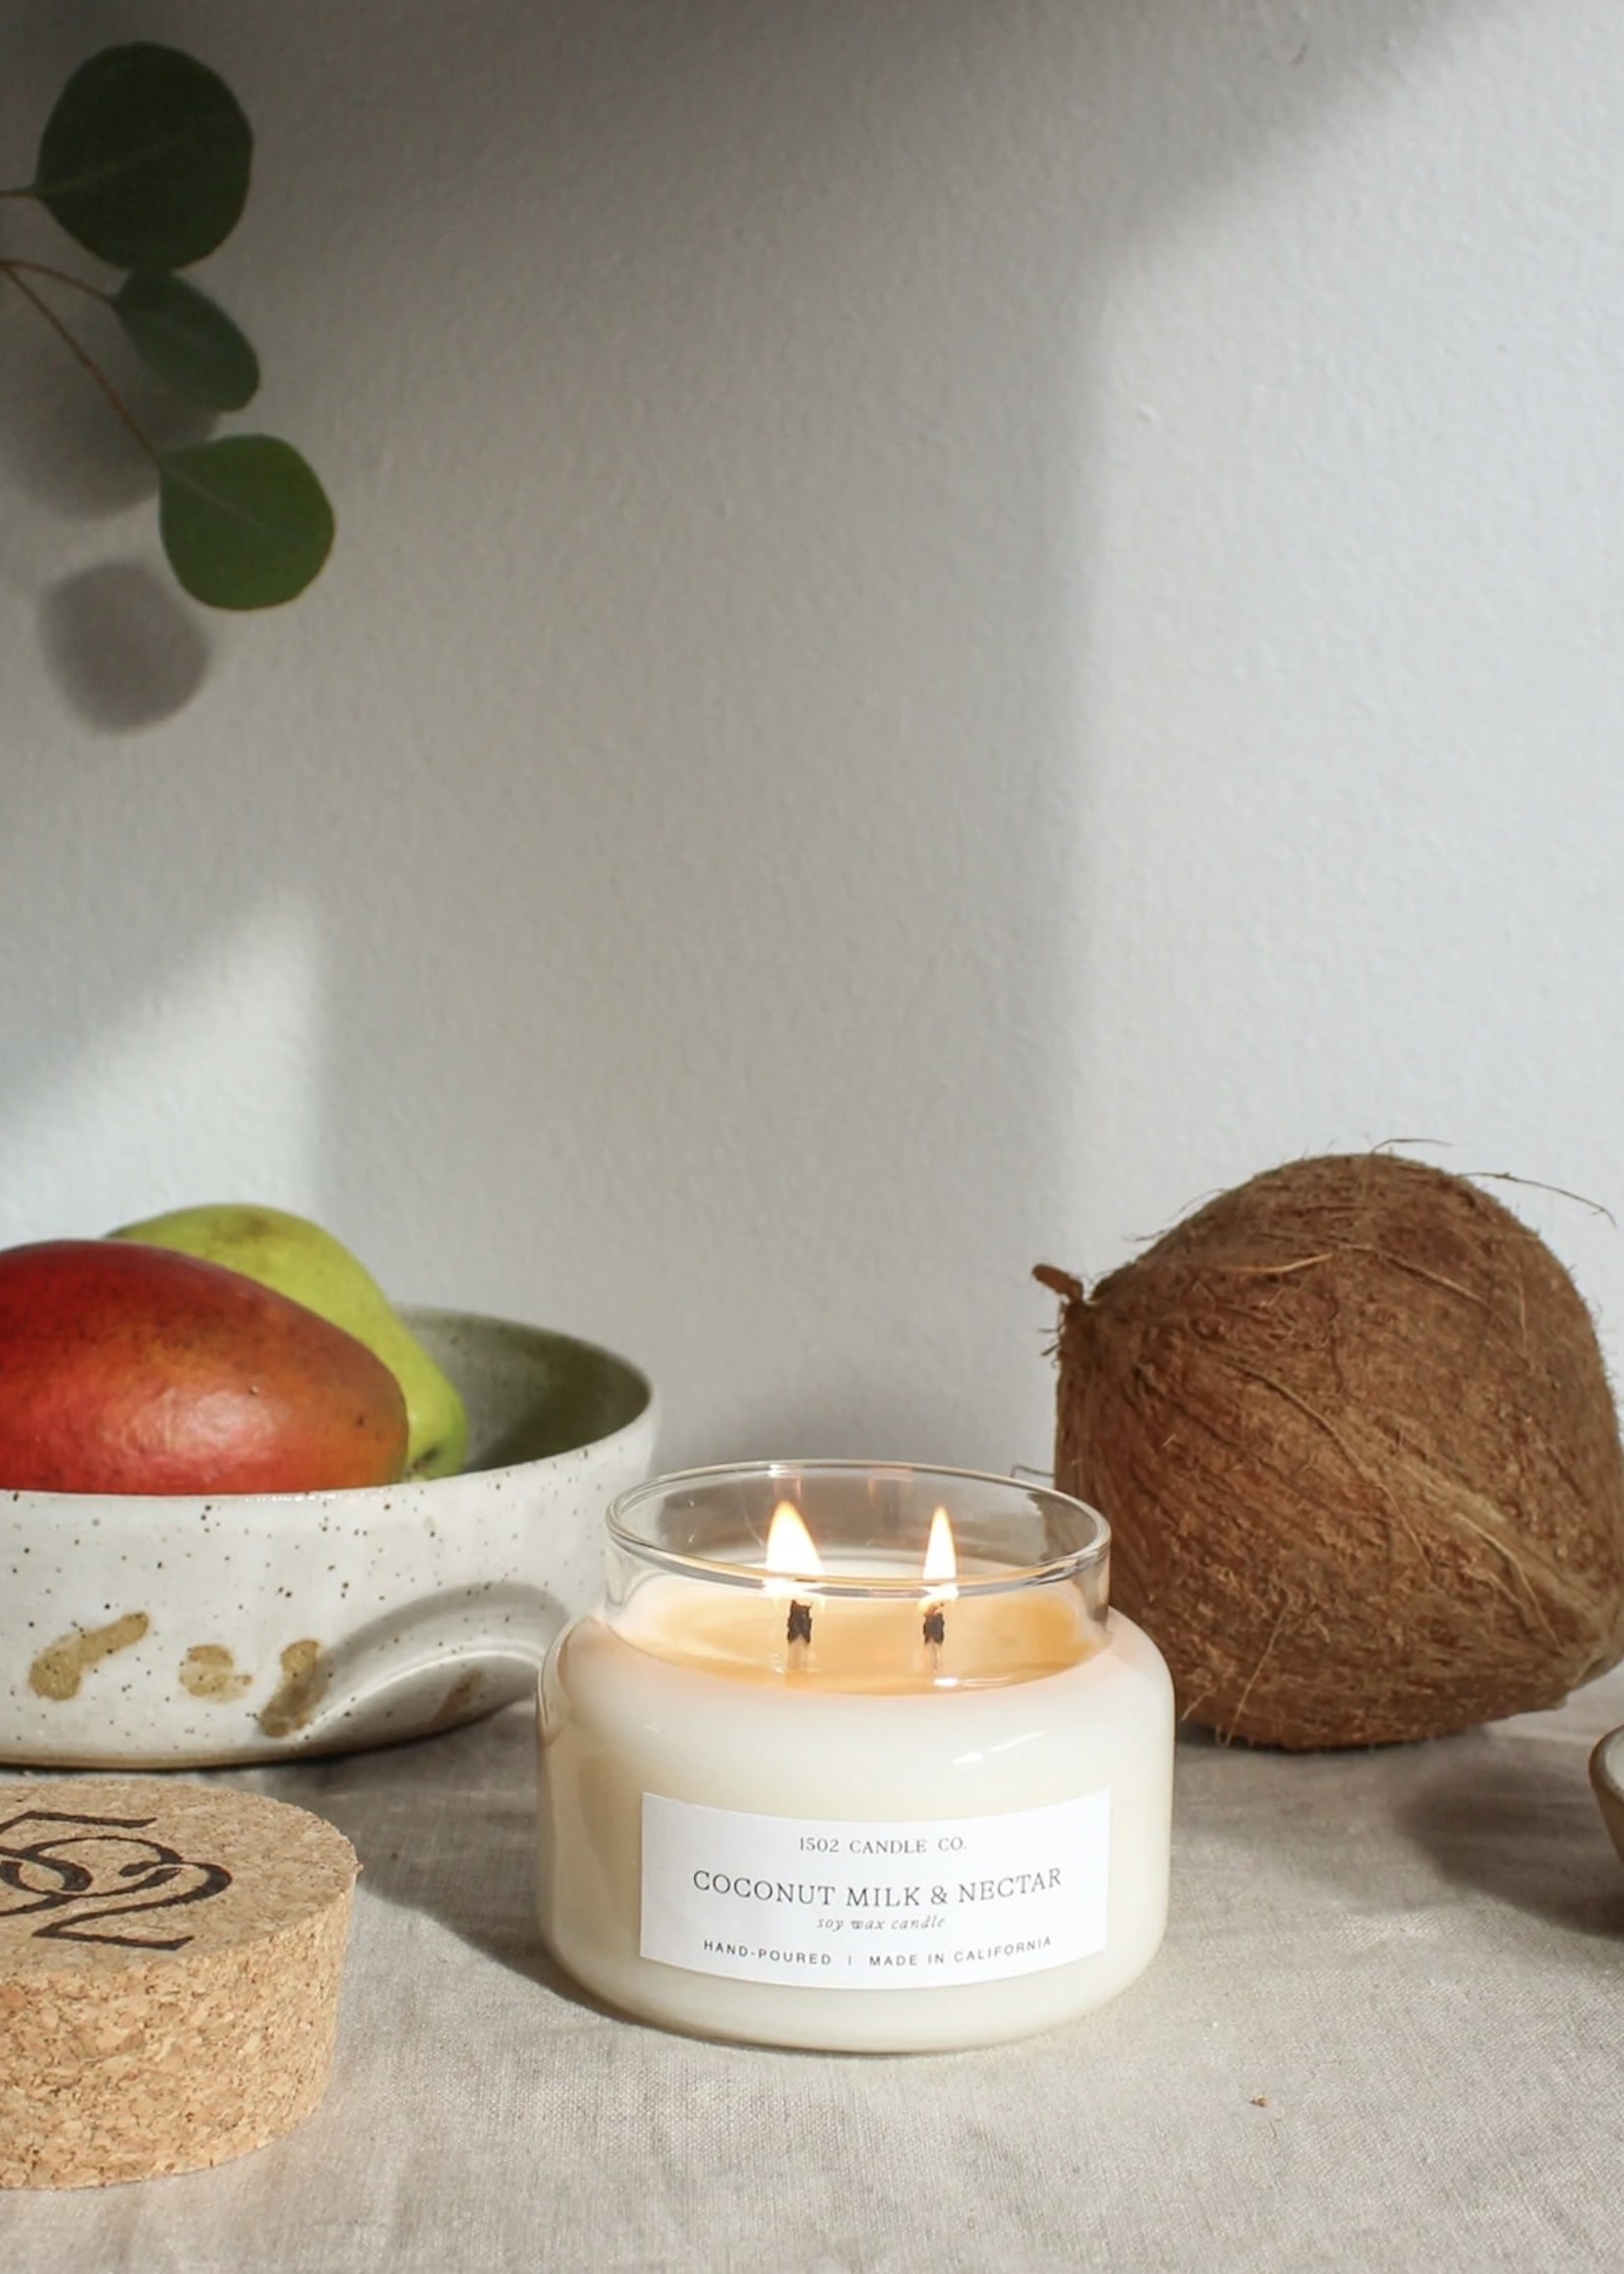 1502 Candle Co. 1502 Coconut Milk and Nectar Jar Candle